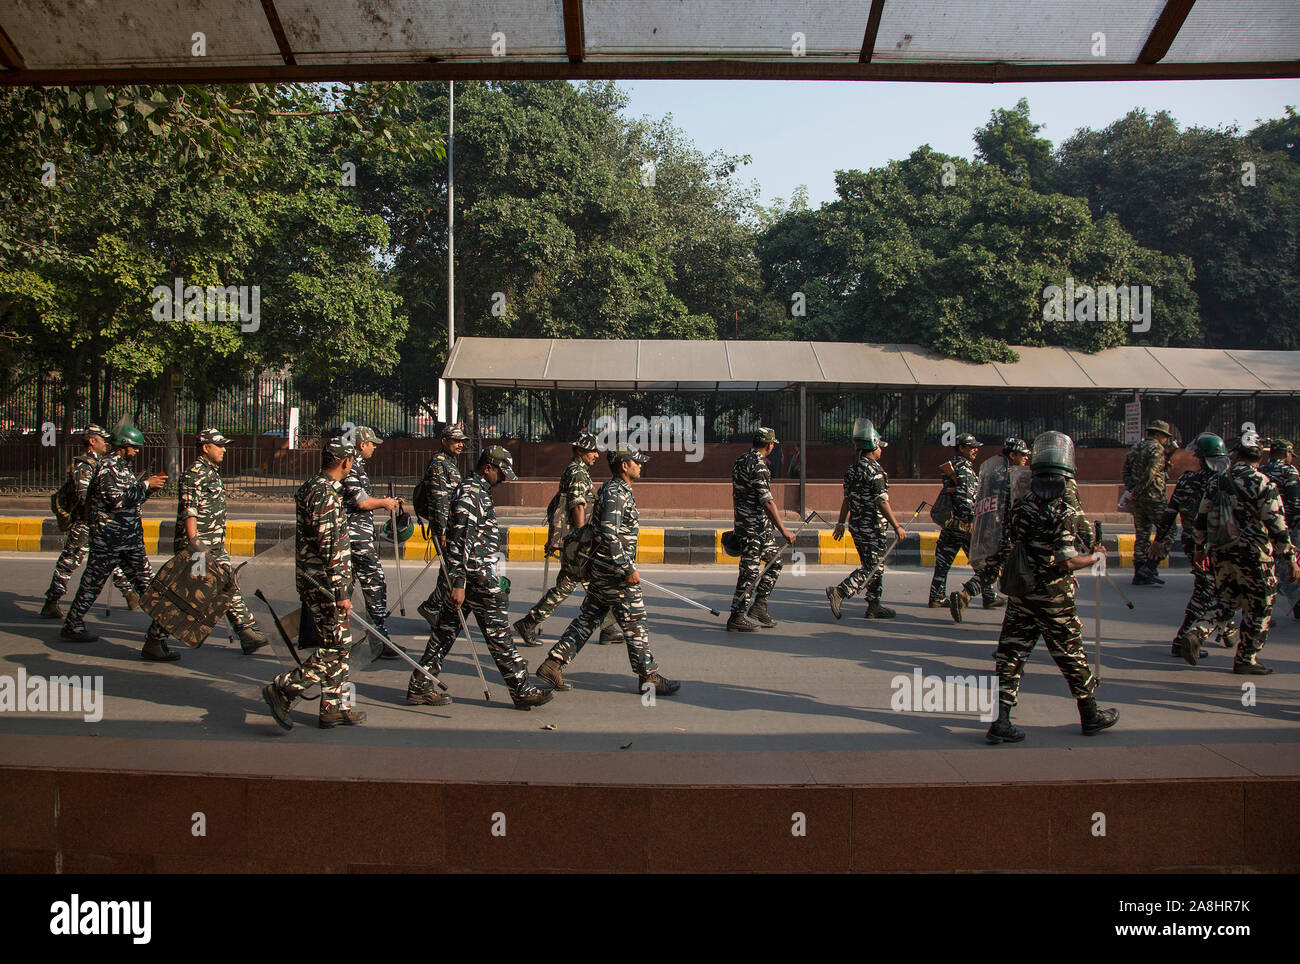 New Delhi. 9th Nov, 2019. Indian paramilitary troopers march outside the Supreme Court in New Delhi, Nov. 9, 2019. In a landmark judgment, the Supreme Court of India decided on Saturday to give a disputed land in northern state of Uttar Pradesh's Ayodhya district to the Hindus represented by the 'Janambhoomi Nyas.' The Muslims, represented by the 'Sunni Waqf Board,' would get a piece of land measuring 5 acres at some other place within Ayodhya, said the apex court's verdict. Credit: Javed Dar/Xinhua/Alamy Live News Stock Photo